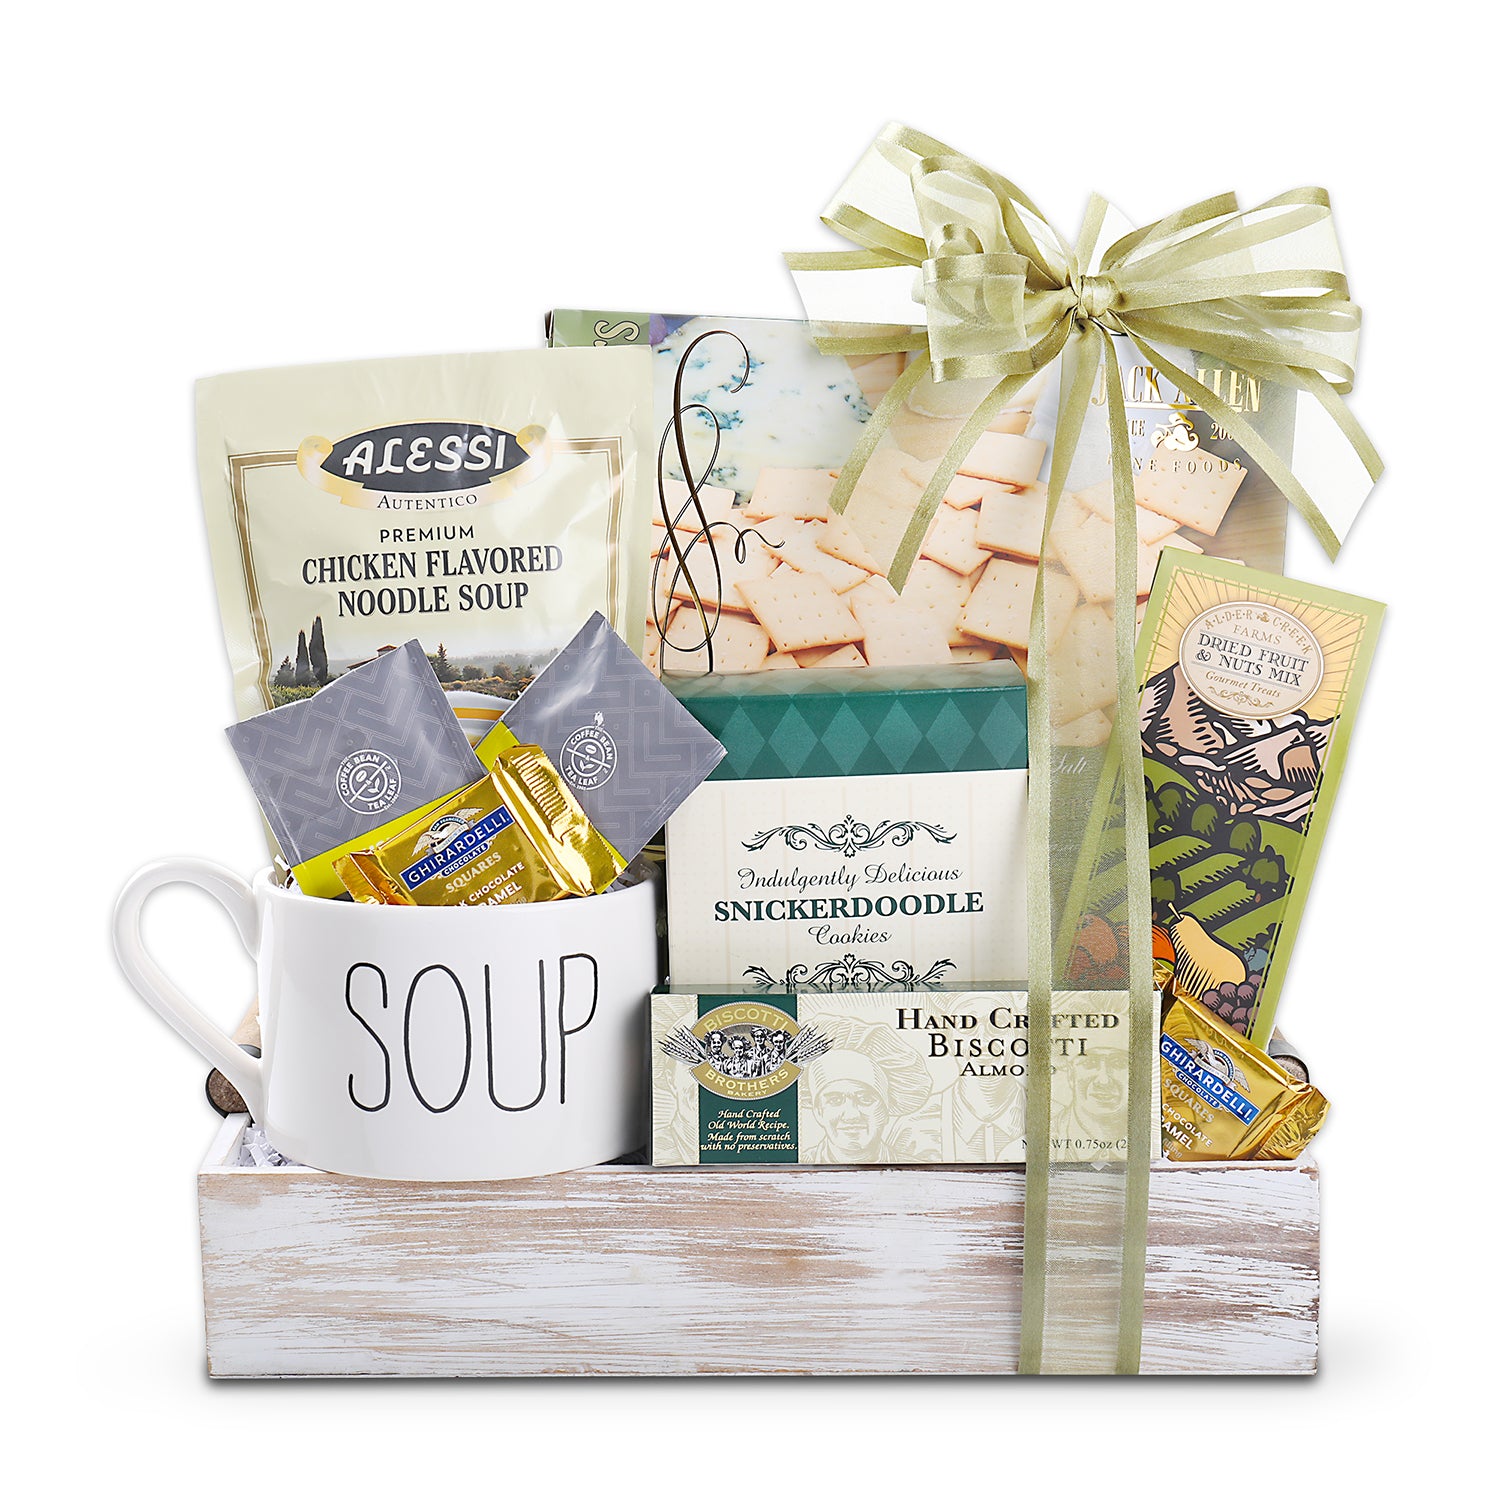 Artisan Olive Oil & Sea Salt Crackers (4oz.), Snickerdoodle Cookies (2oz.), Biscotti Brothers Handcrafted Almond Biscotti (0.75oz.), Alessi Premium Chicken Flavored Noodle Soup (6oz.), Dried Fruit & Nut Mix (1.5oz.), Coffee Bean & Tea Leaf Lemongrass Tea (2 pcs.), Ghirardelli Milk Chocolate and Caramel Tasting Squares (2pcs.), Large Soup Mug, Reusable Tray